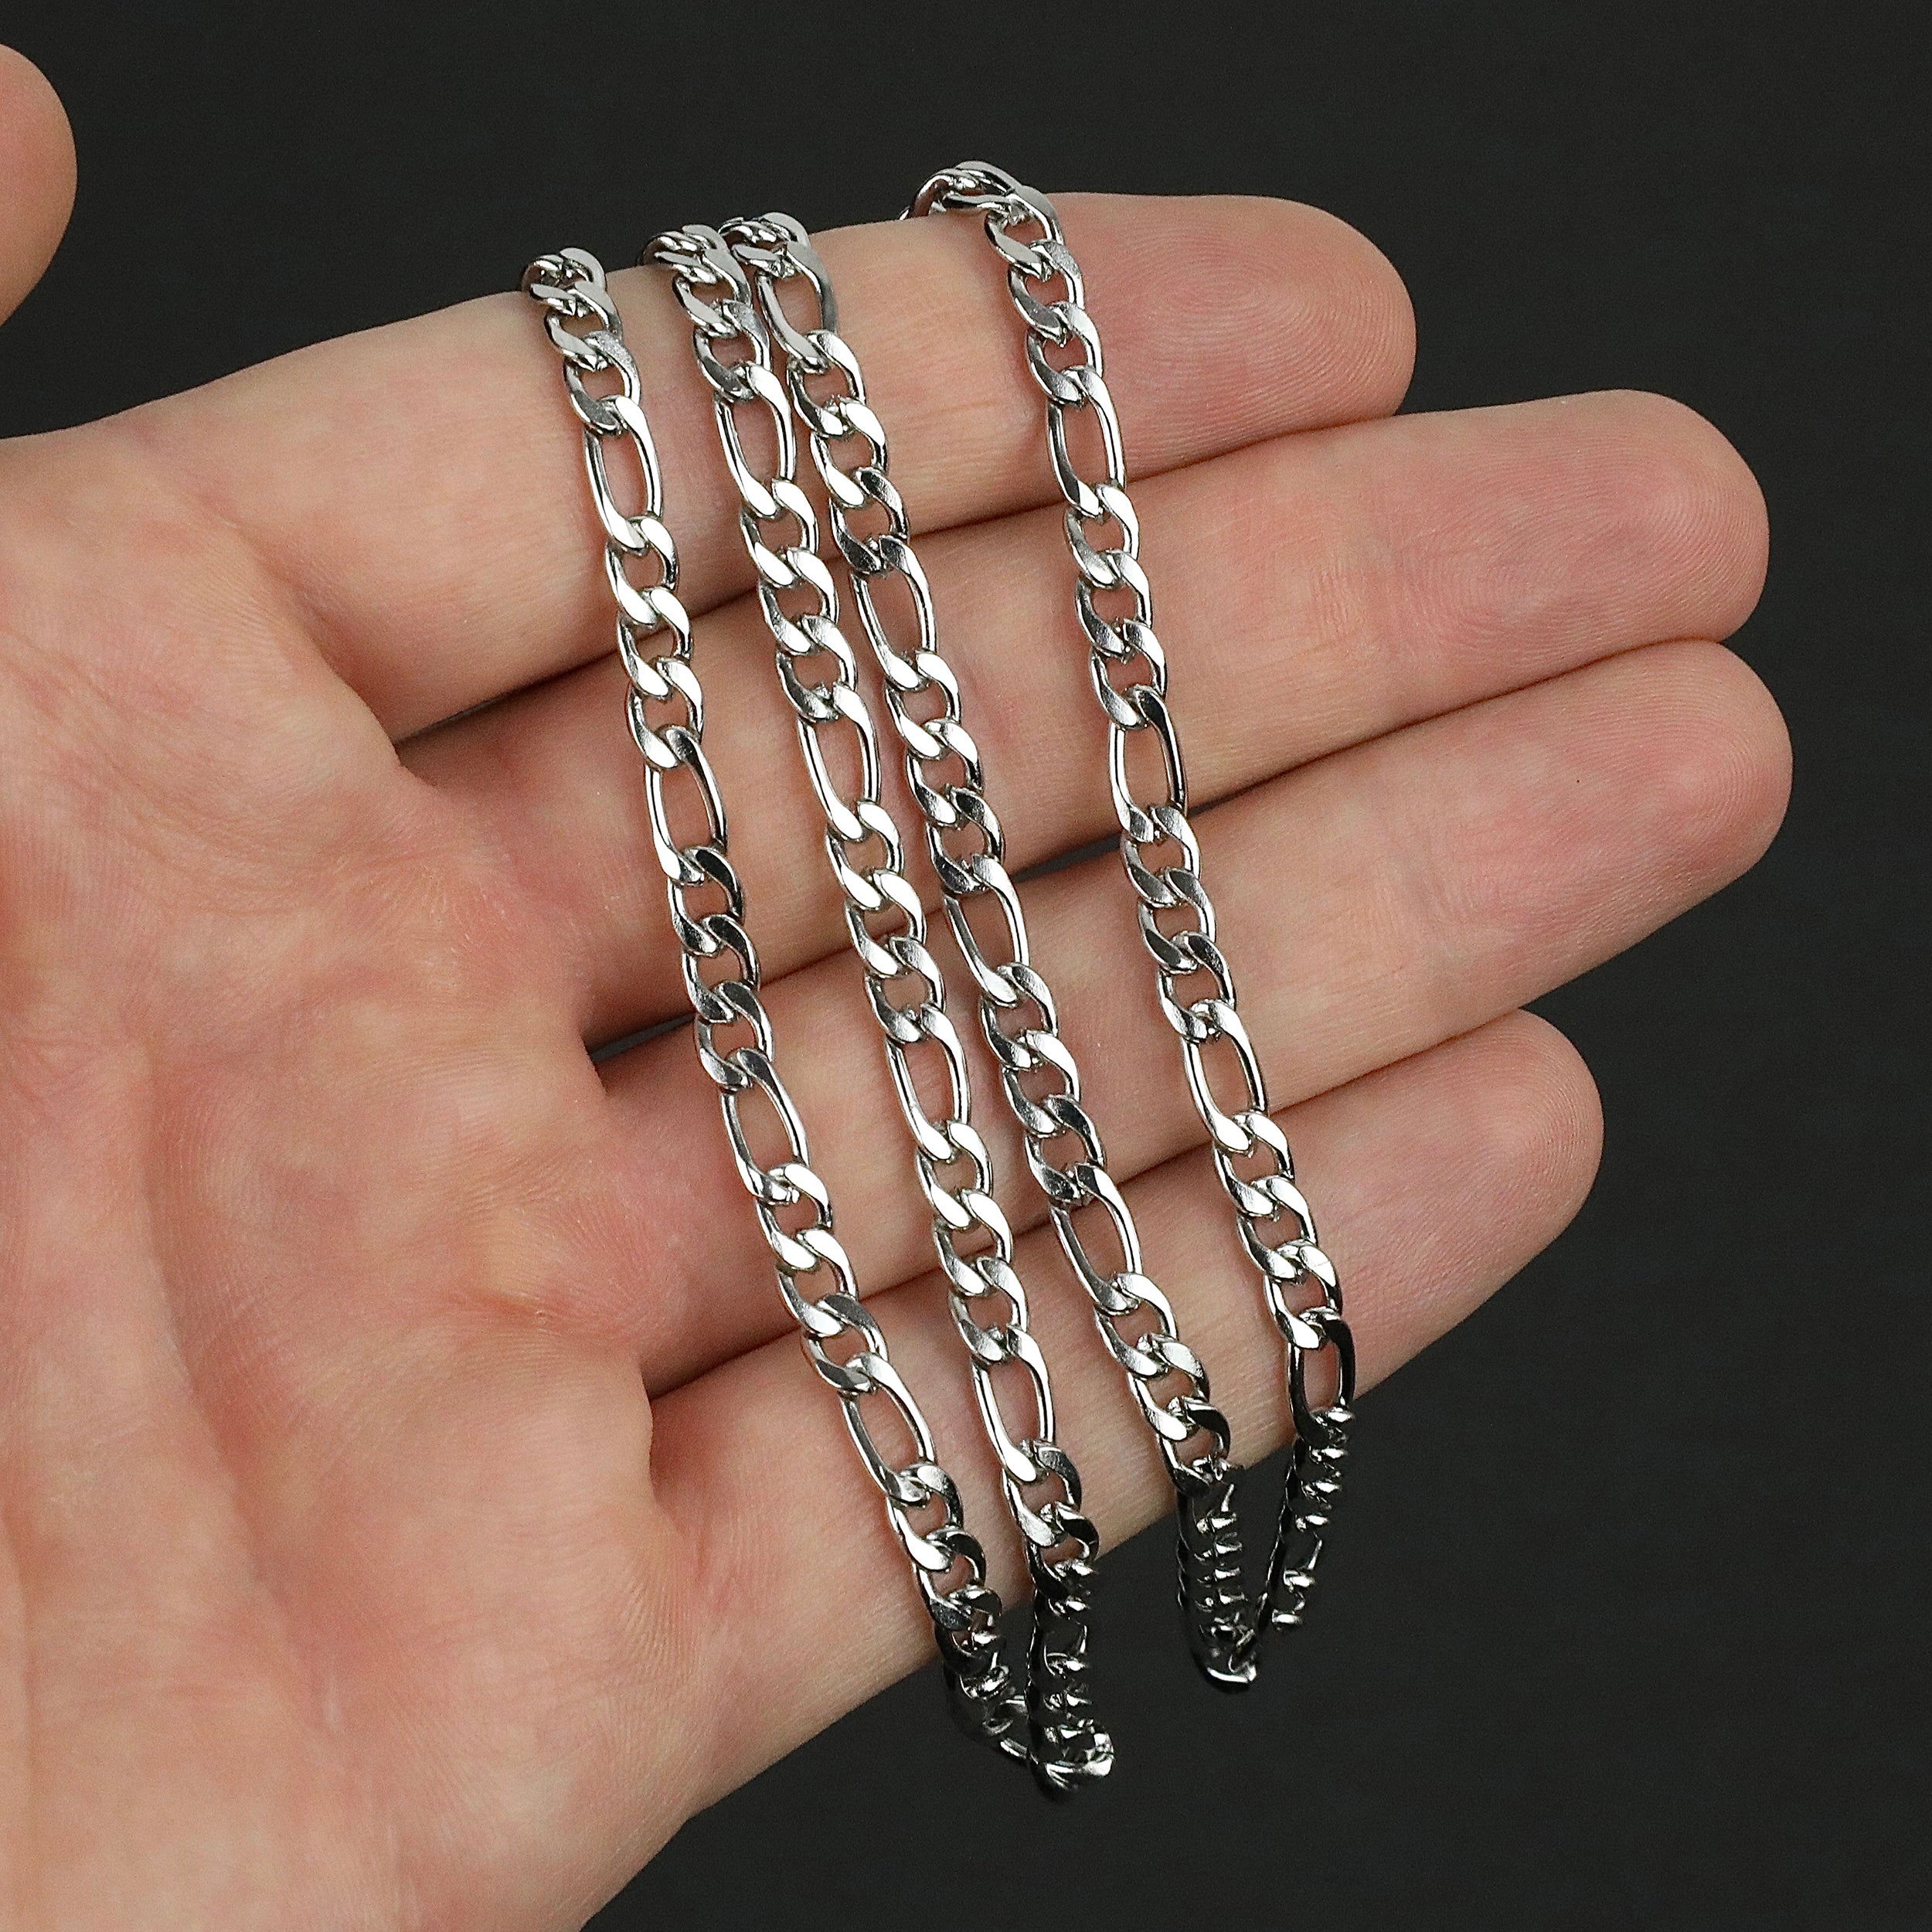 Figaro Chain Necklace - Silver 4.5mm